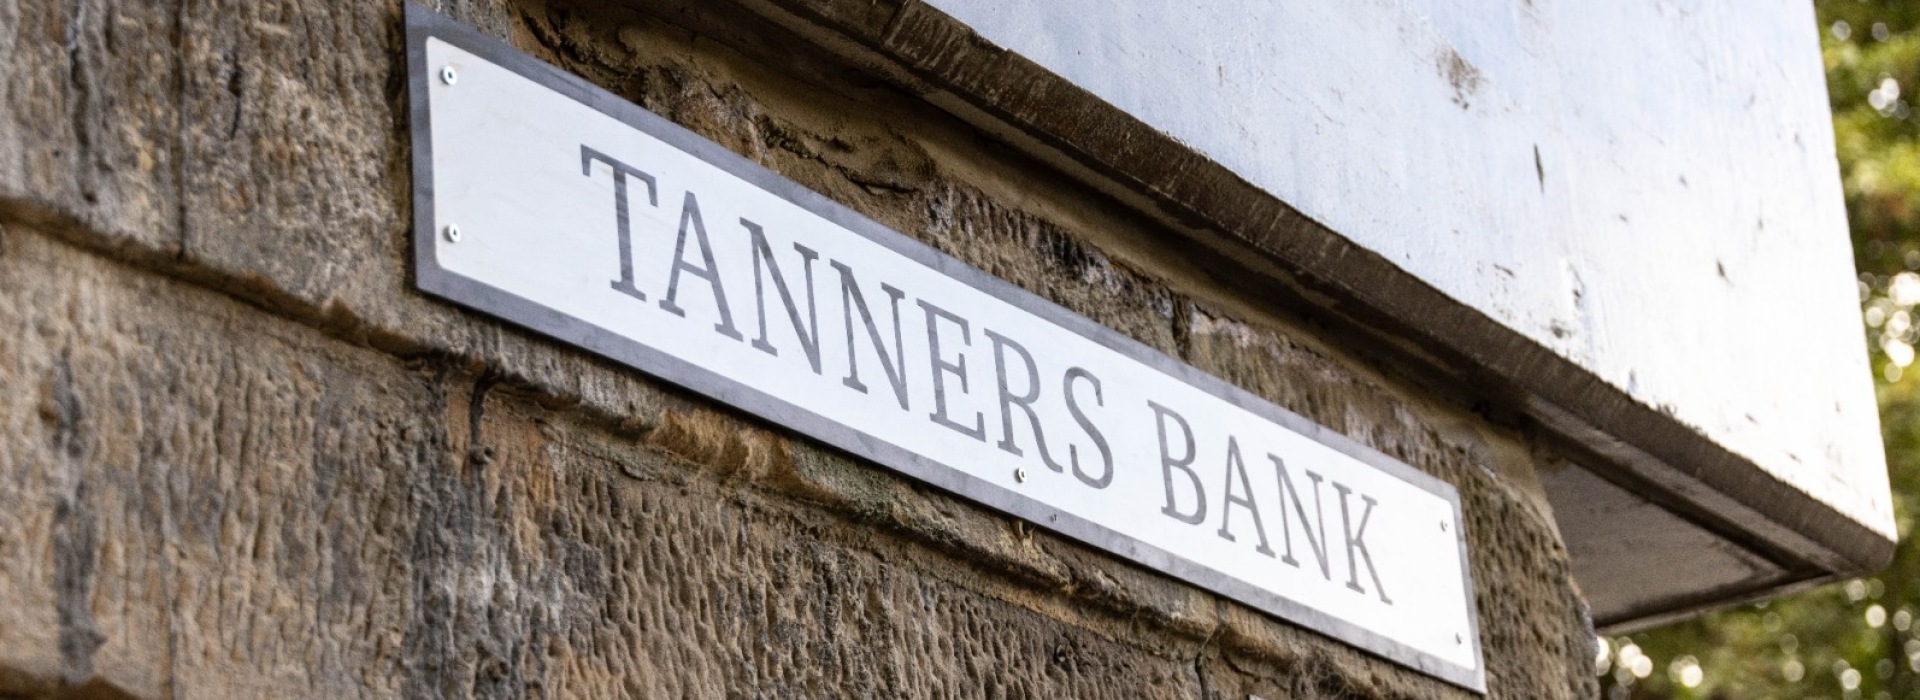 Tanners Bank, North Shields